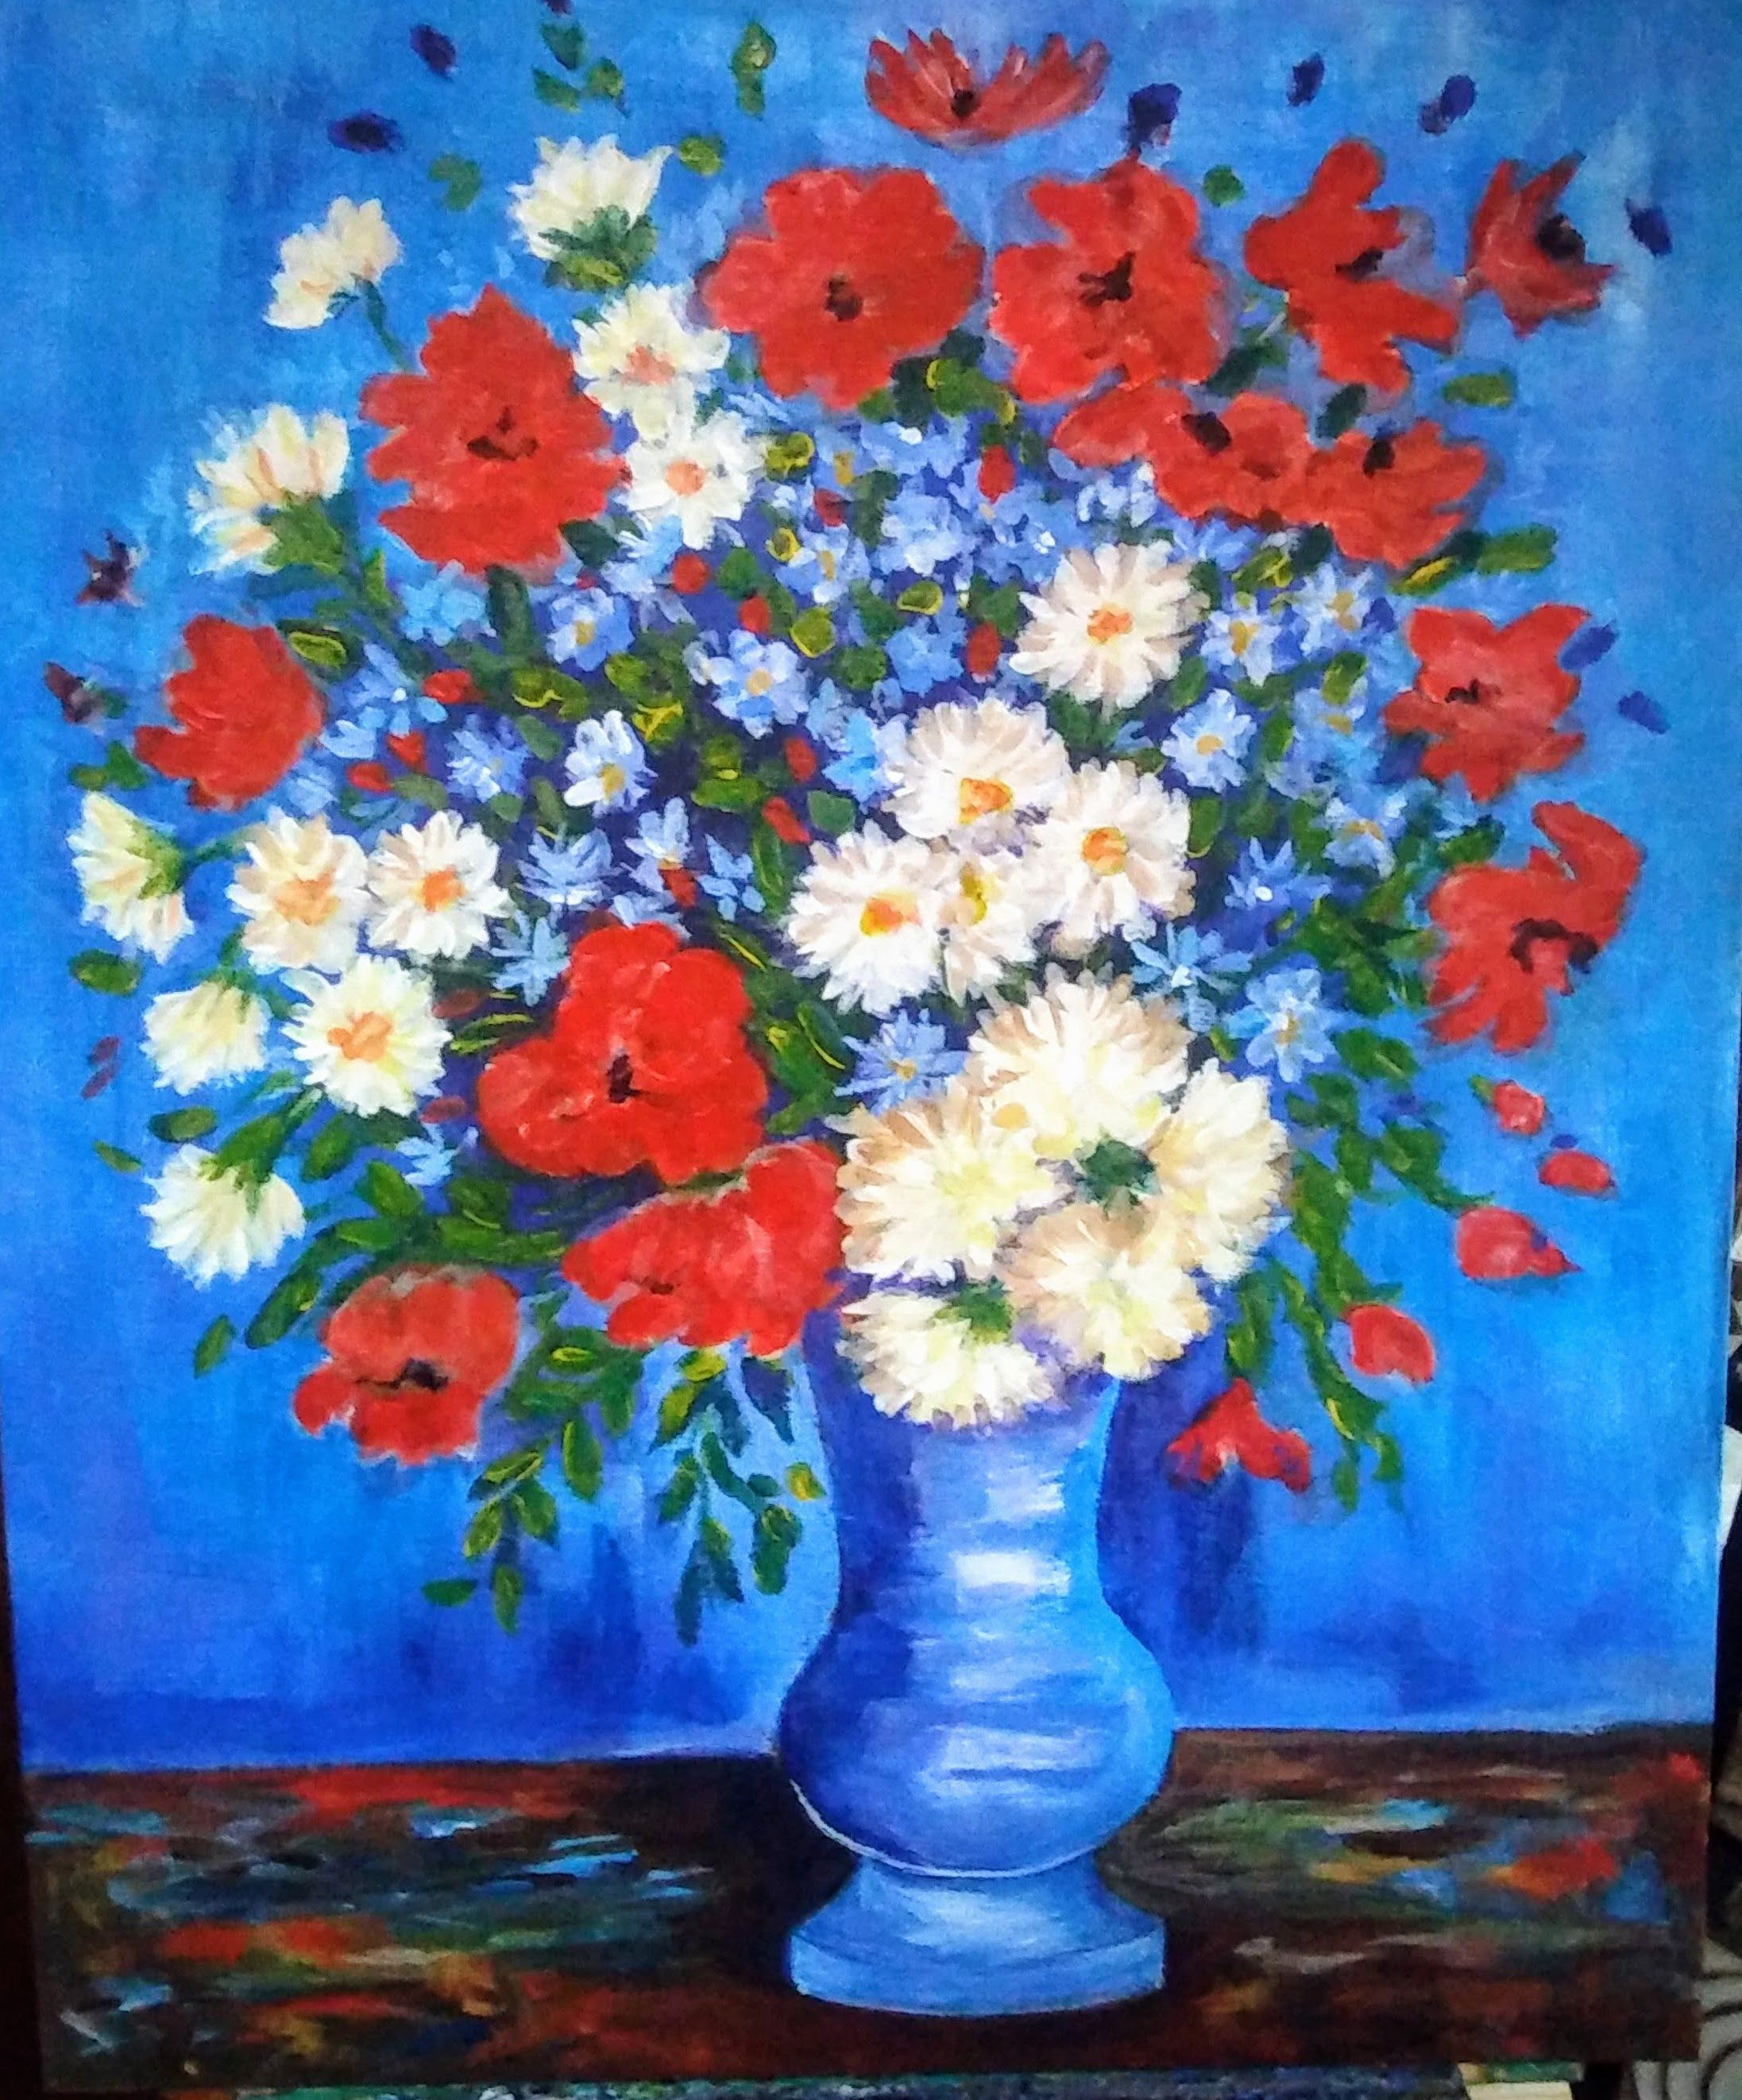 11 Nice Van Gogh Vase with Flowers 2024 free download van gogh vase with flowers of van gogh corn flowers was painted by christine gerst from one of pertaining to van gogh corn flowers was painted by christine gerst from one of over 270 lessons